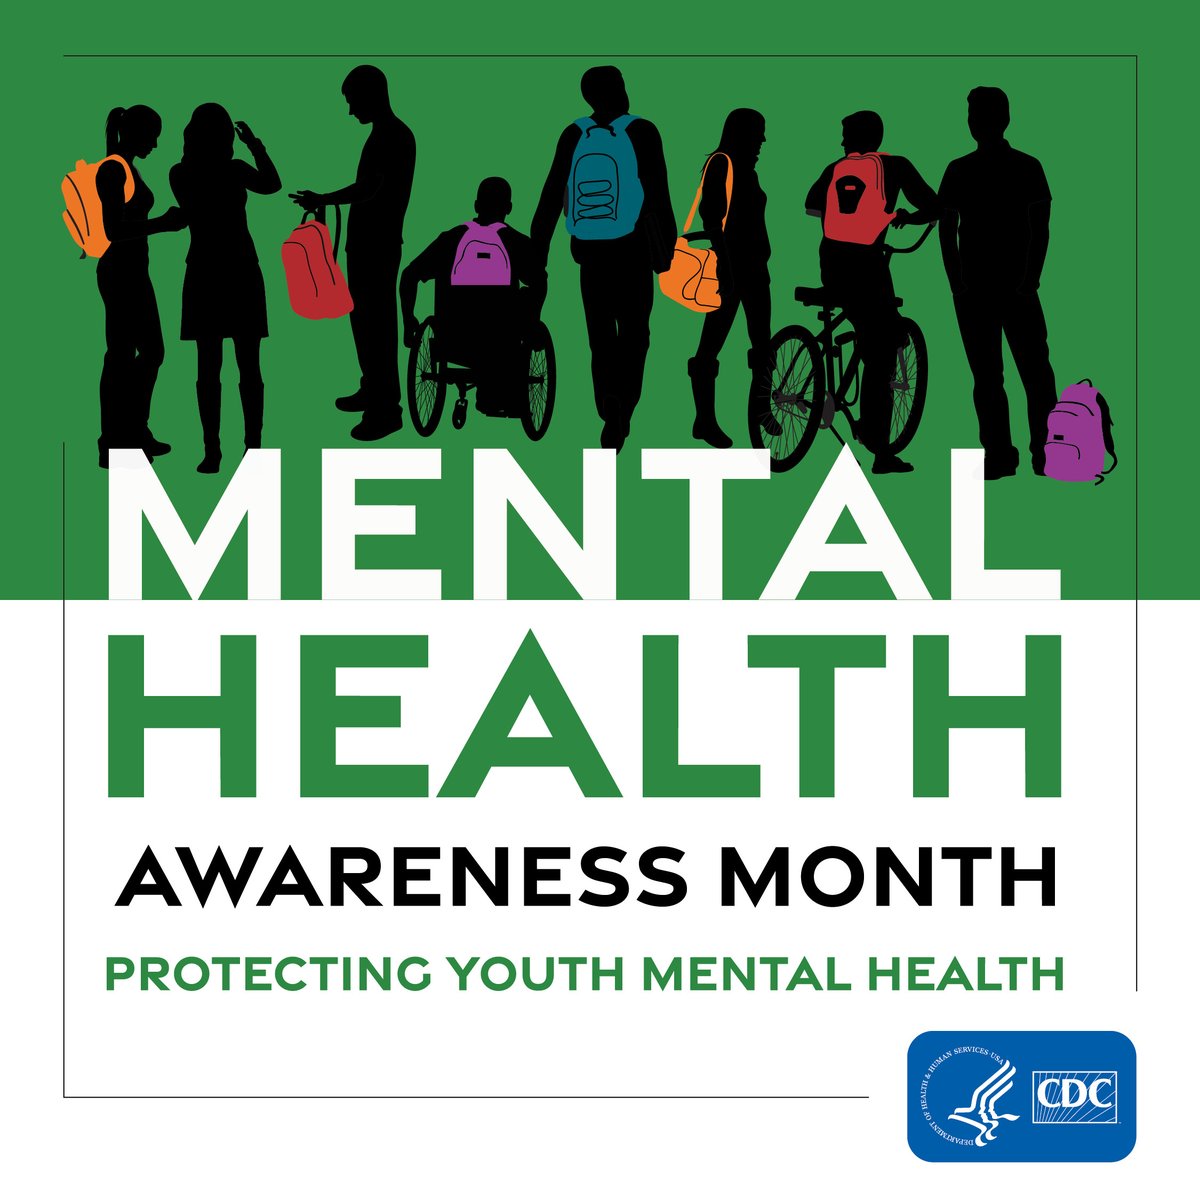 Building connections with young people can help protect their mental health. A sense of belonging can make a big difference. Learn more about youth mental health and the power of connectedness. bit.ly/3o2tGgu #MentalHealthAwarenessMonth #MentalHealthMatters